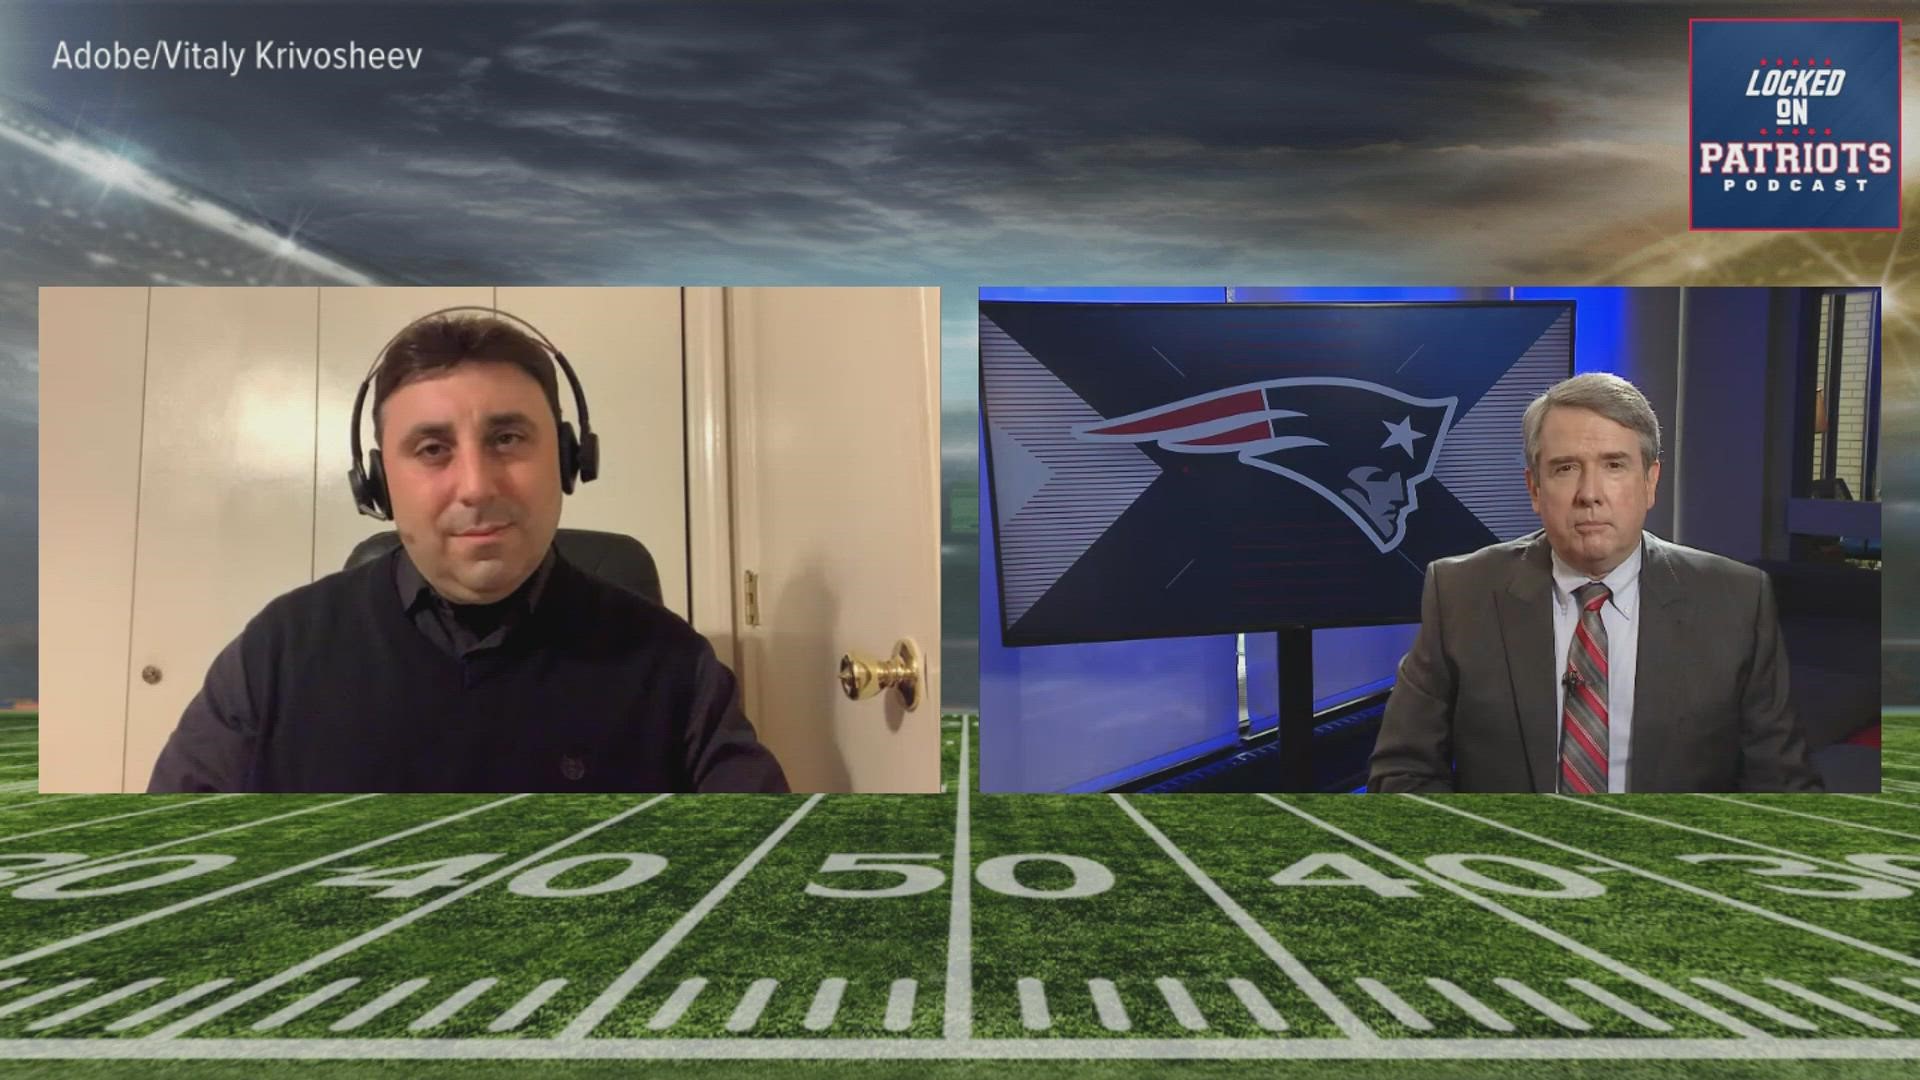 Mike D'Abate from the Locked on Patriots podcast previews the Pats week one matchup vs the Dolphins